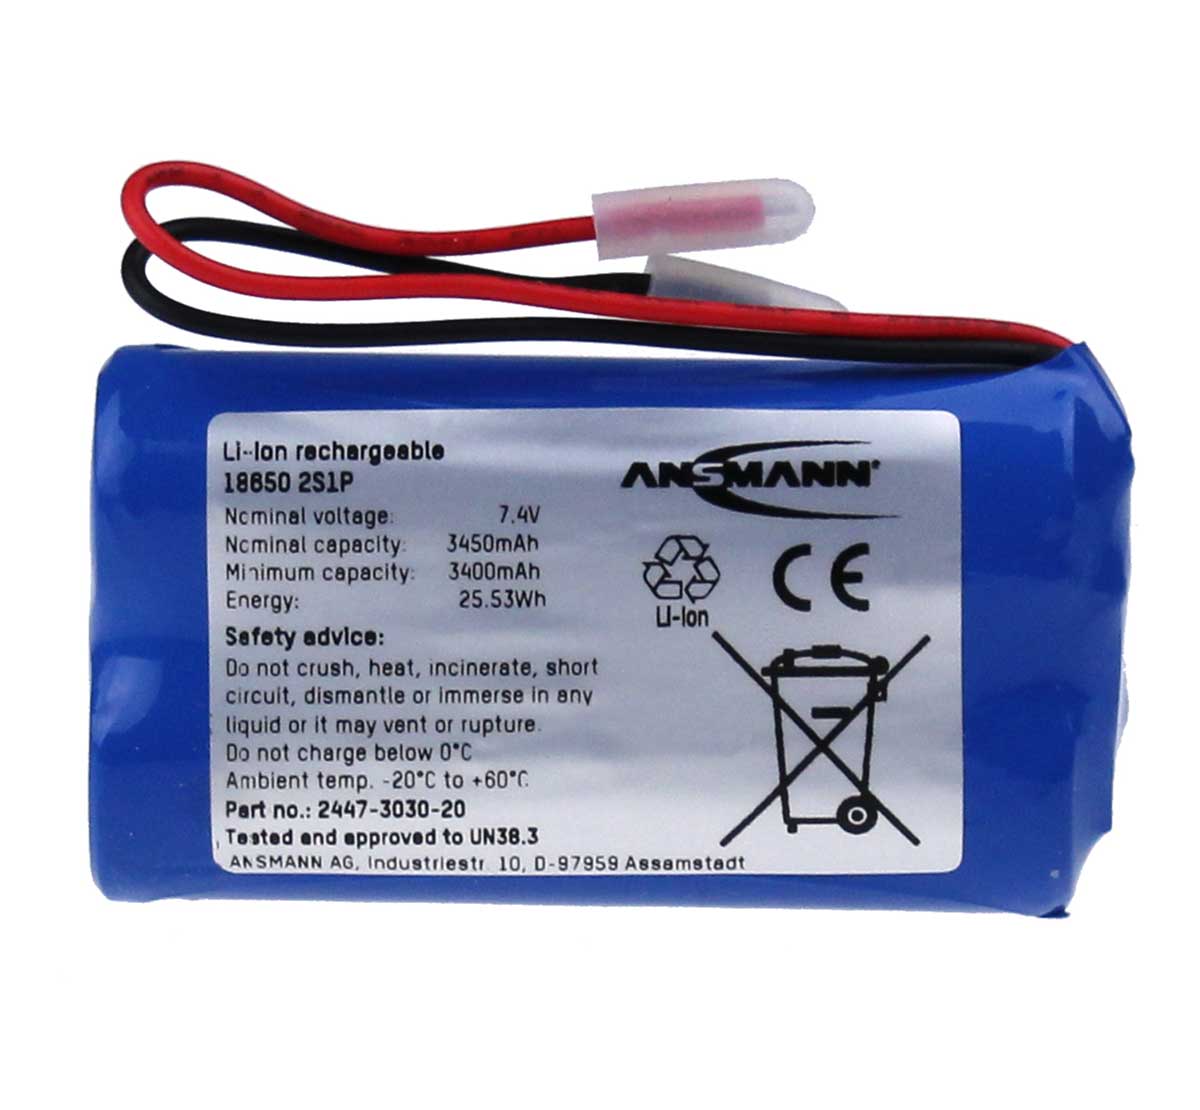 Ansmann Industrial 2S1P 7.4V 3450mAh High Capacity Rechargeable Li-ion Battery Pack